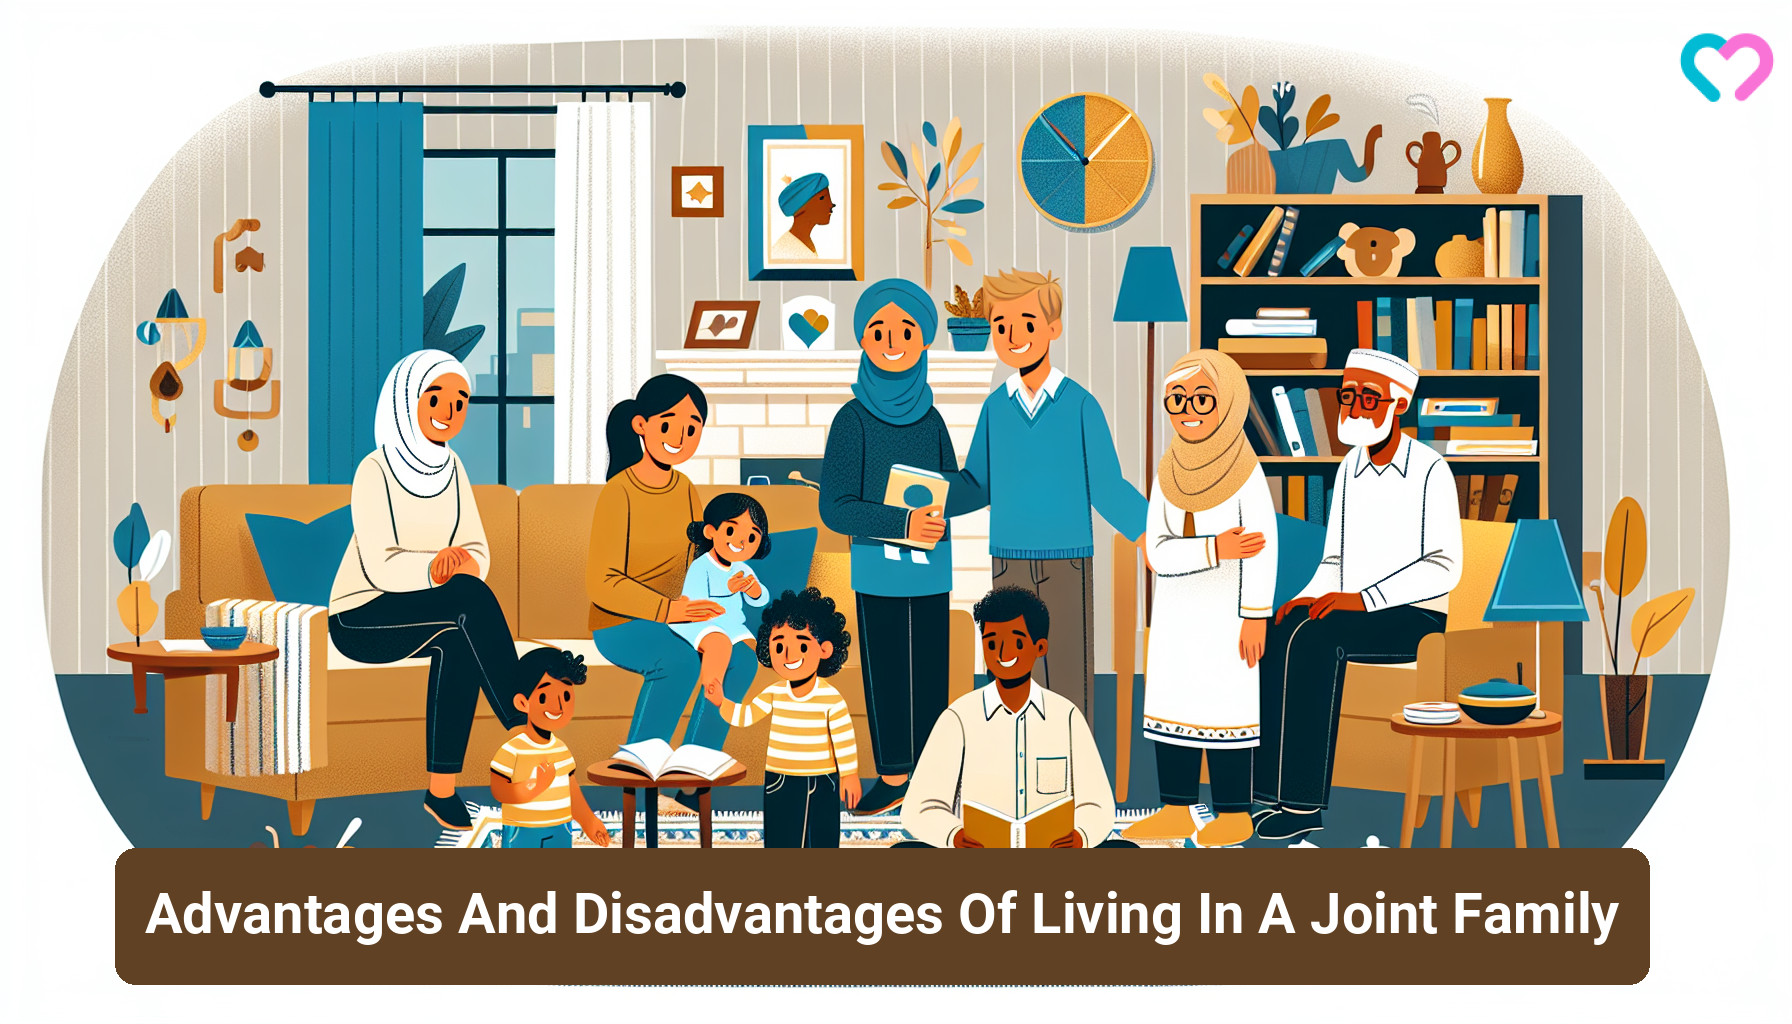 Advantages and disadvantages of joint family_illustration